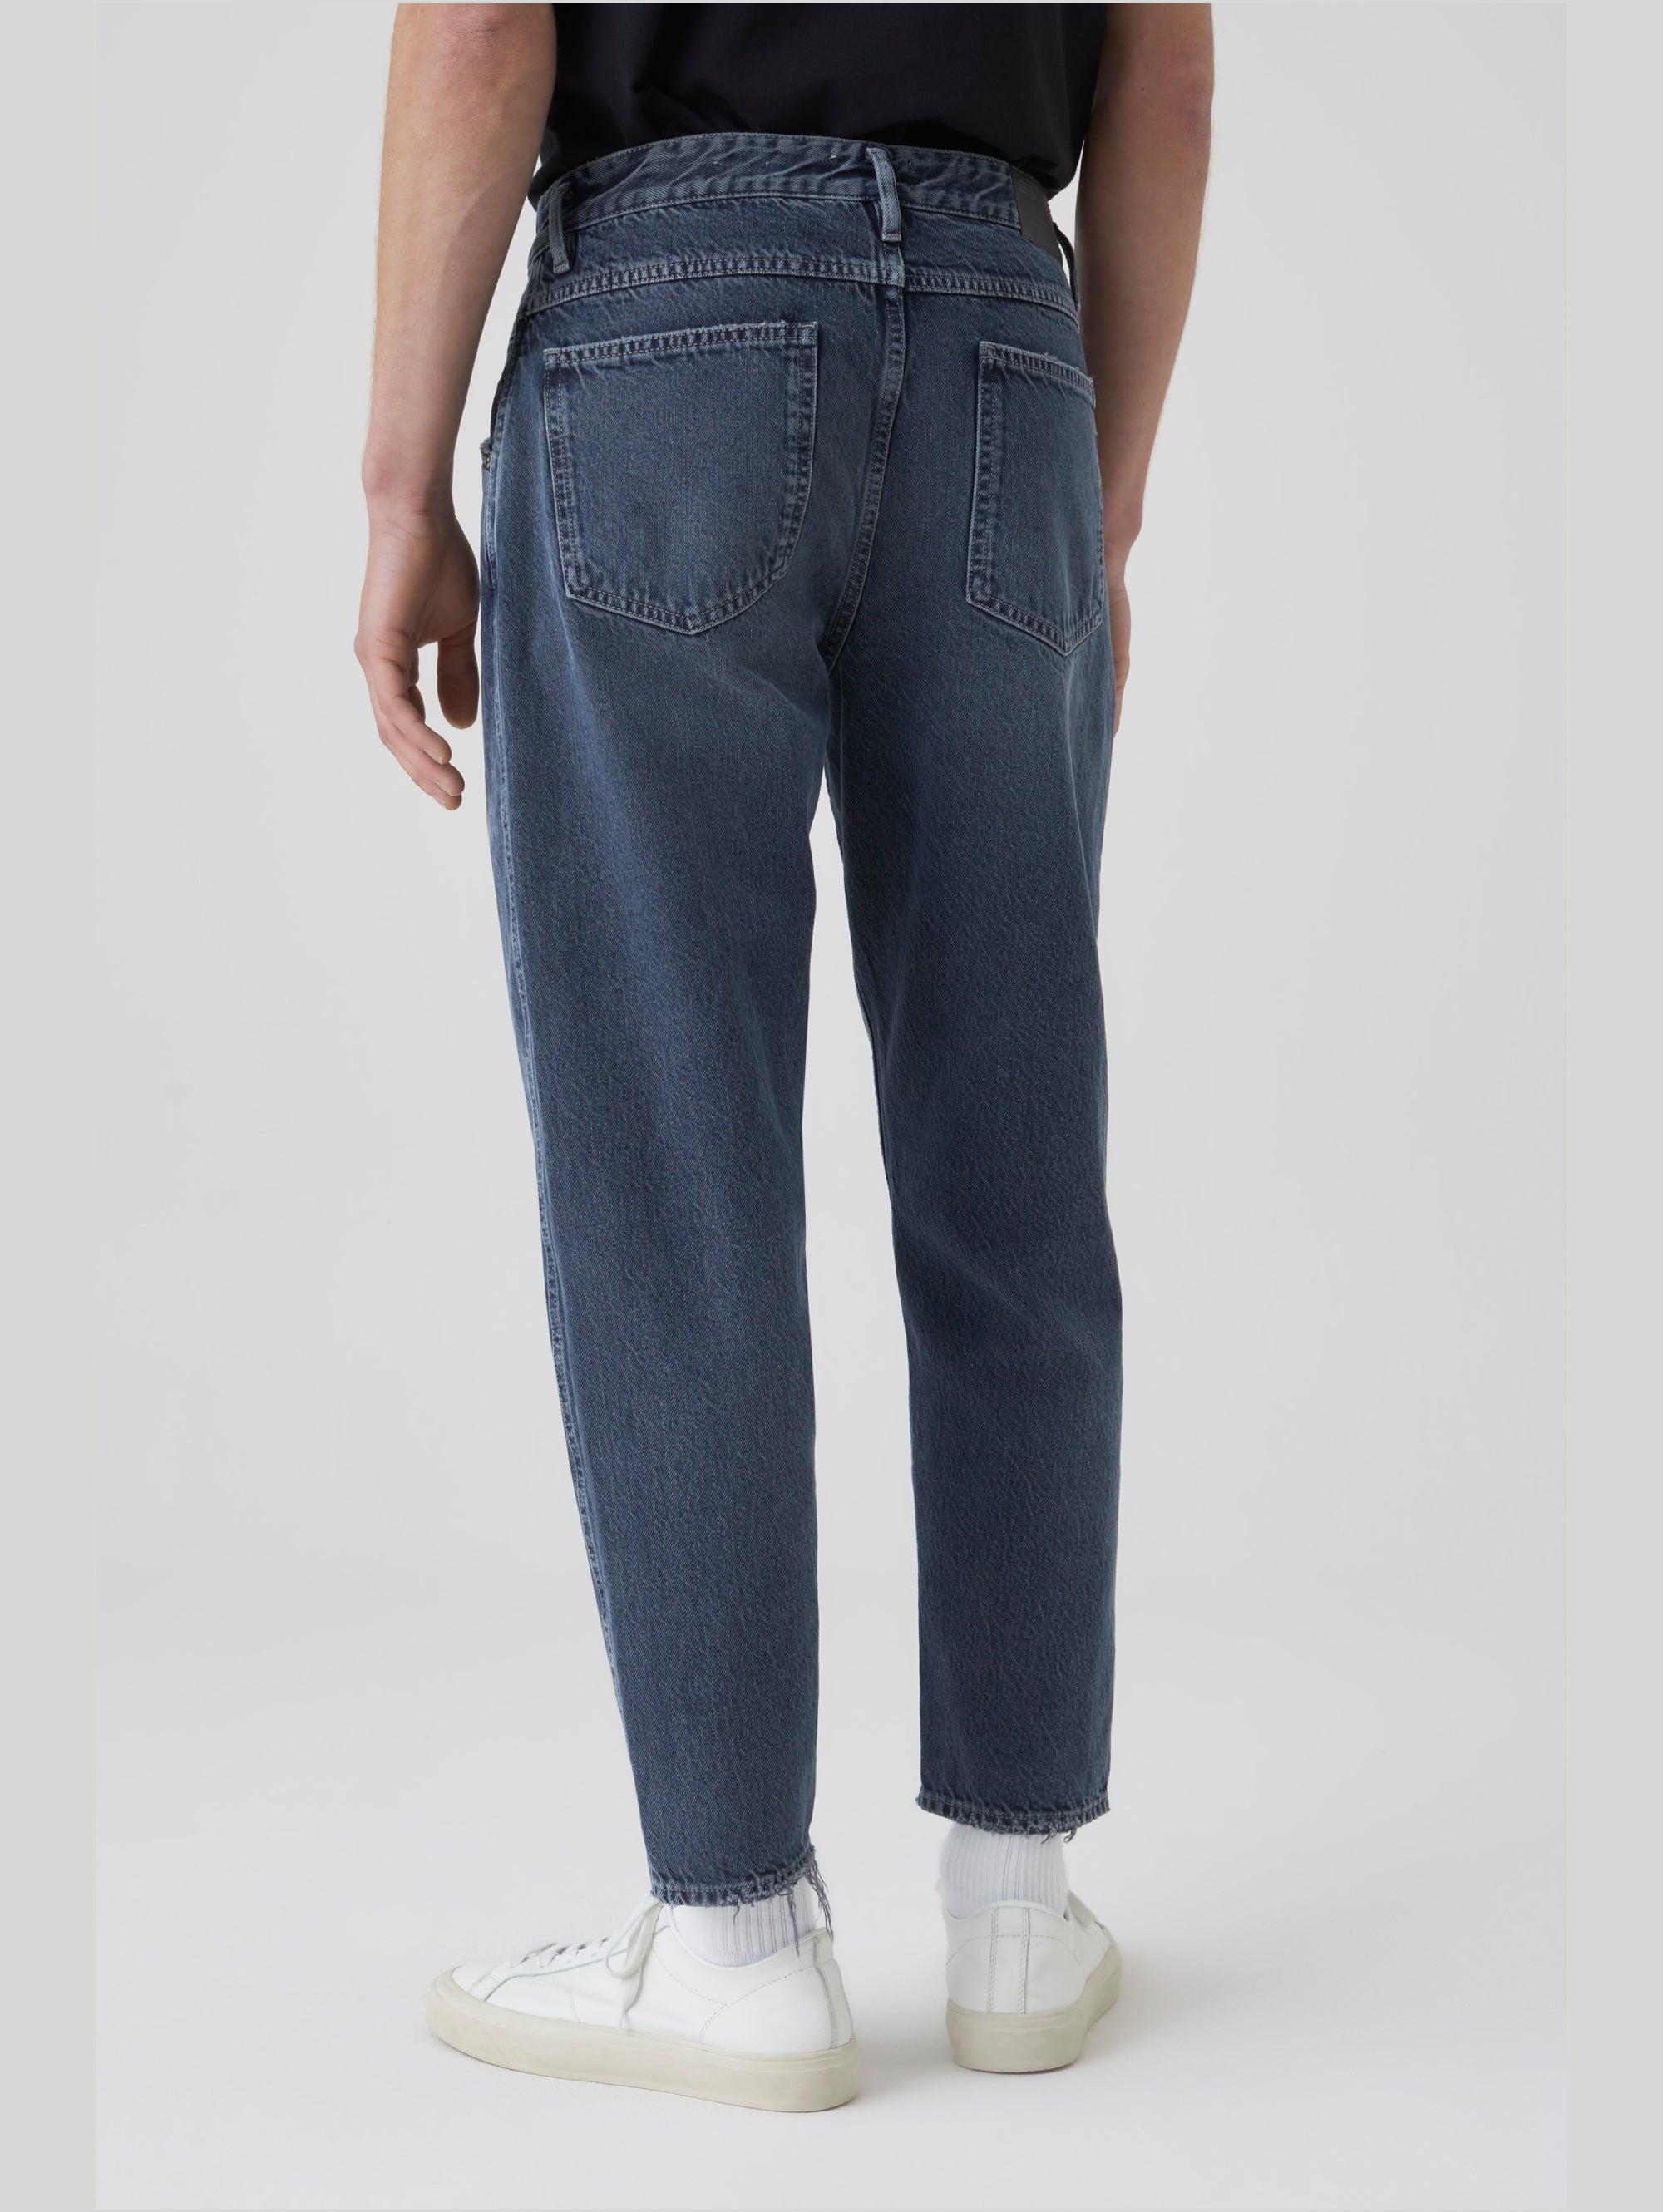 Studio Nicholson Denim Forth Cropped Relaxed-leg Jeans in Dark Blue Mens Clothing Jeans Relaxed and loose-fit jeans for Men Blue 